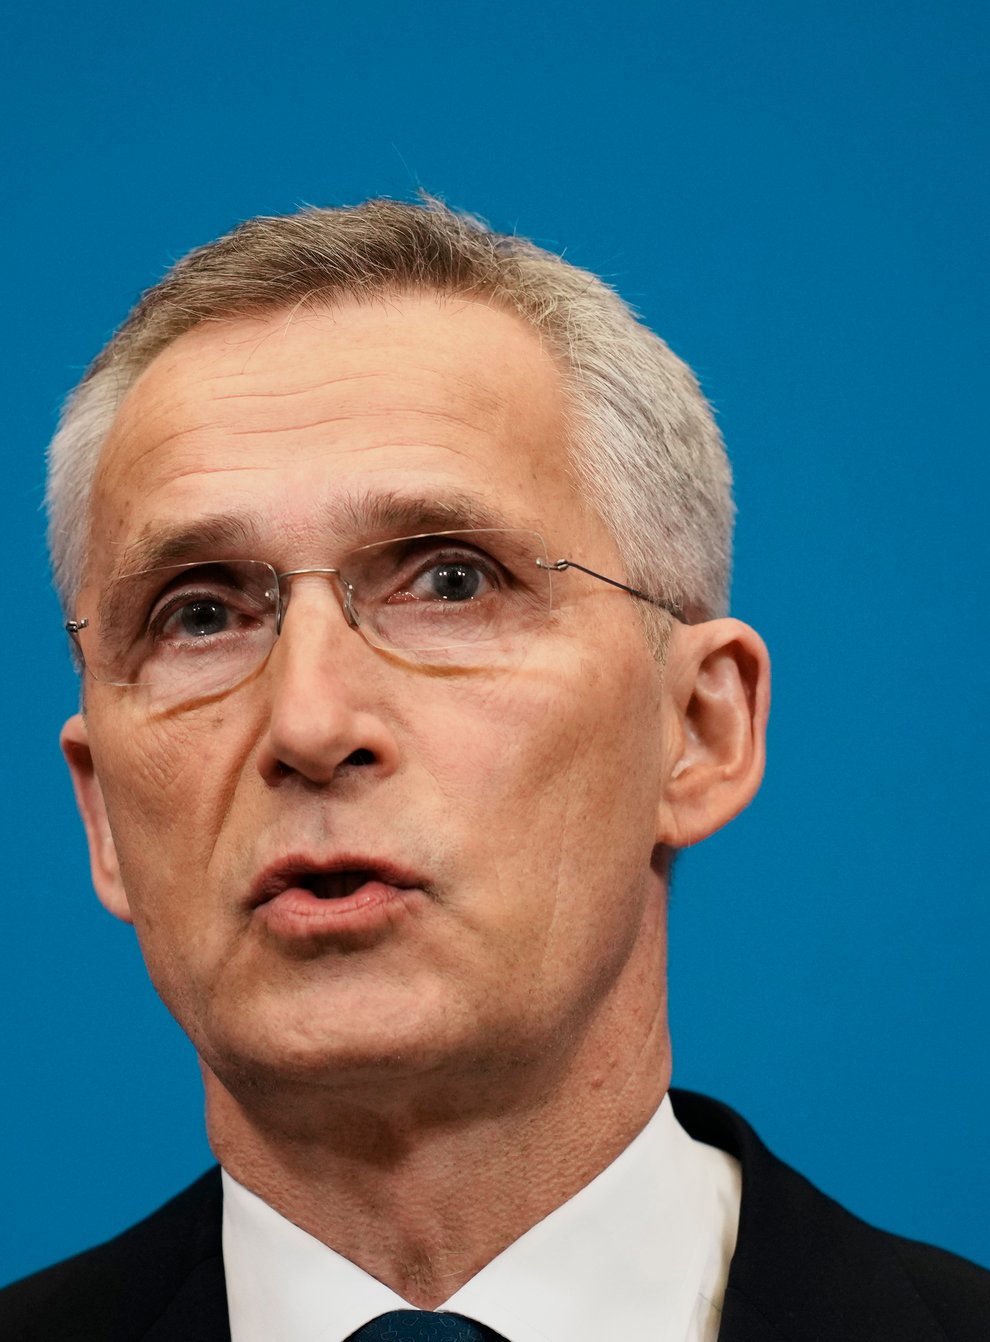 Nato secretary general Jens Stoltenberg speaks during a media conference during an extraordinary NATO summit at NATO headquarters in Brussels, Thursday, March 24, 2022. NATO leaders are extending the mandate of Secretary-General Jens Stoltenberg for an extra year to help steer the 30-nation military organization through the security crisis sparked by Russia’s war on Ukraine (Thibault Camus/AP)